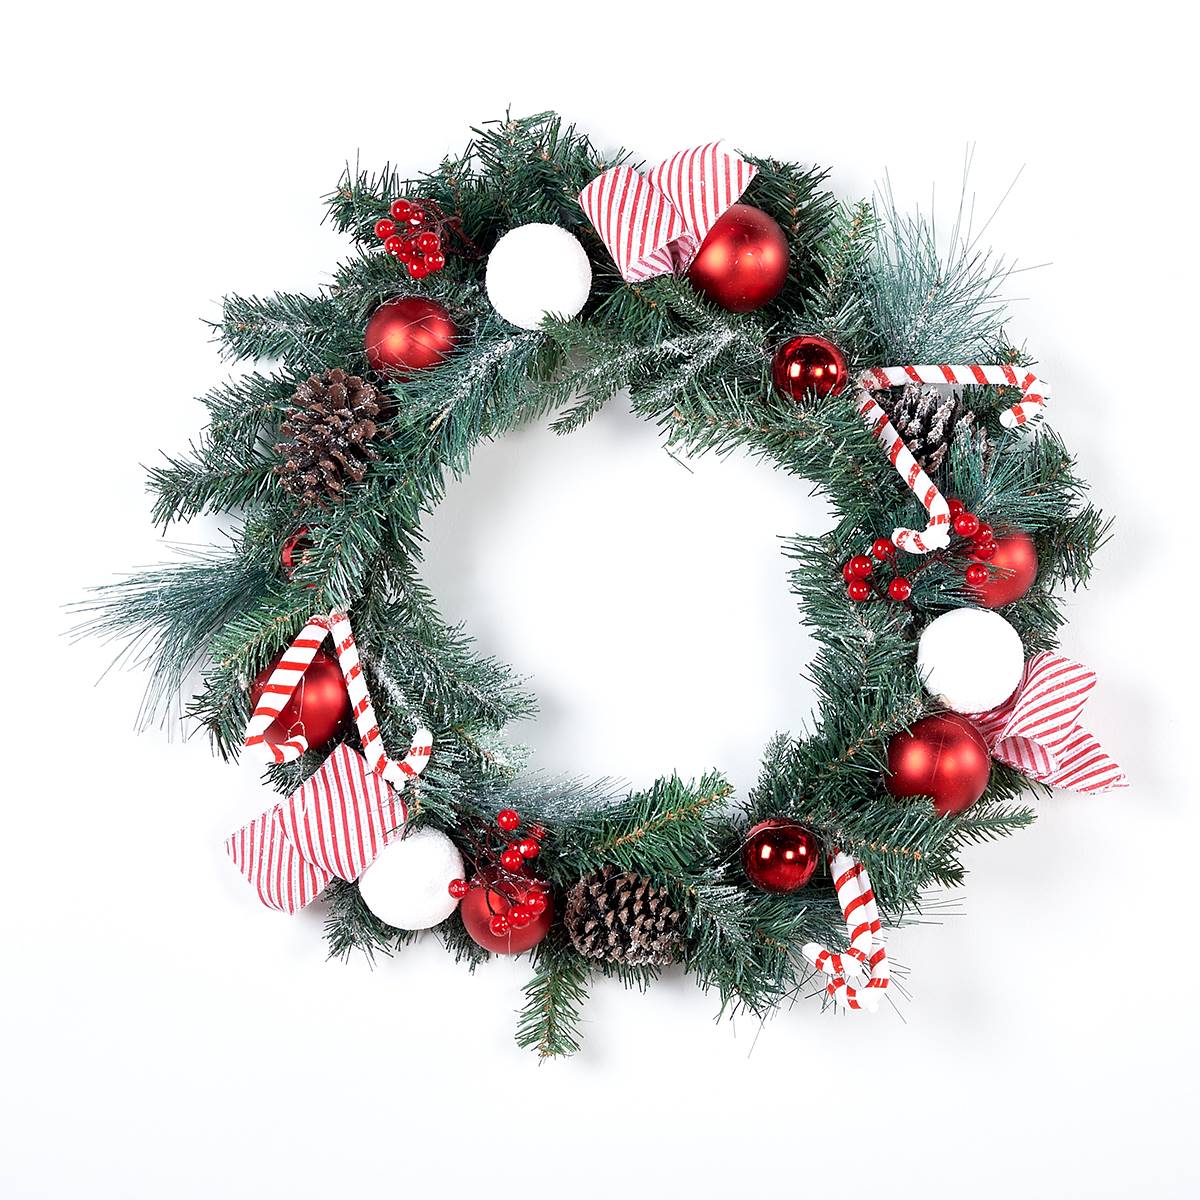 24in. Life-Like Wreath W/Candy Canes & Pine Cones